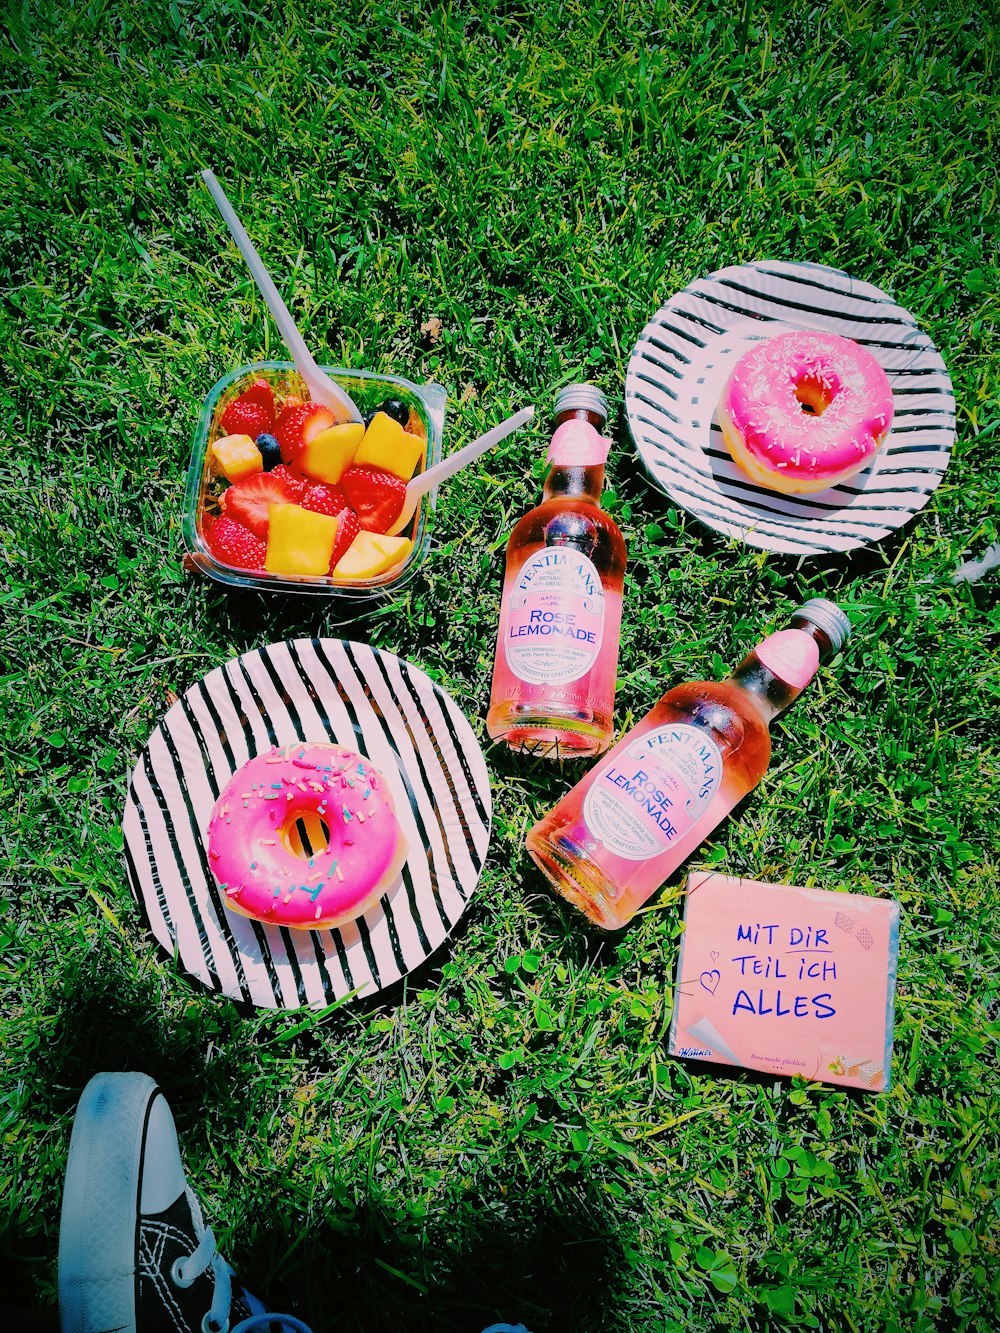 baked donuts on plates near glass bottles on grass